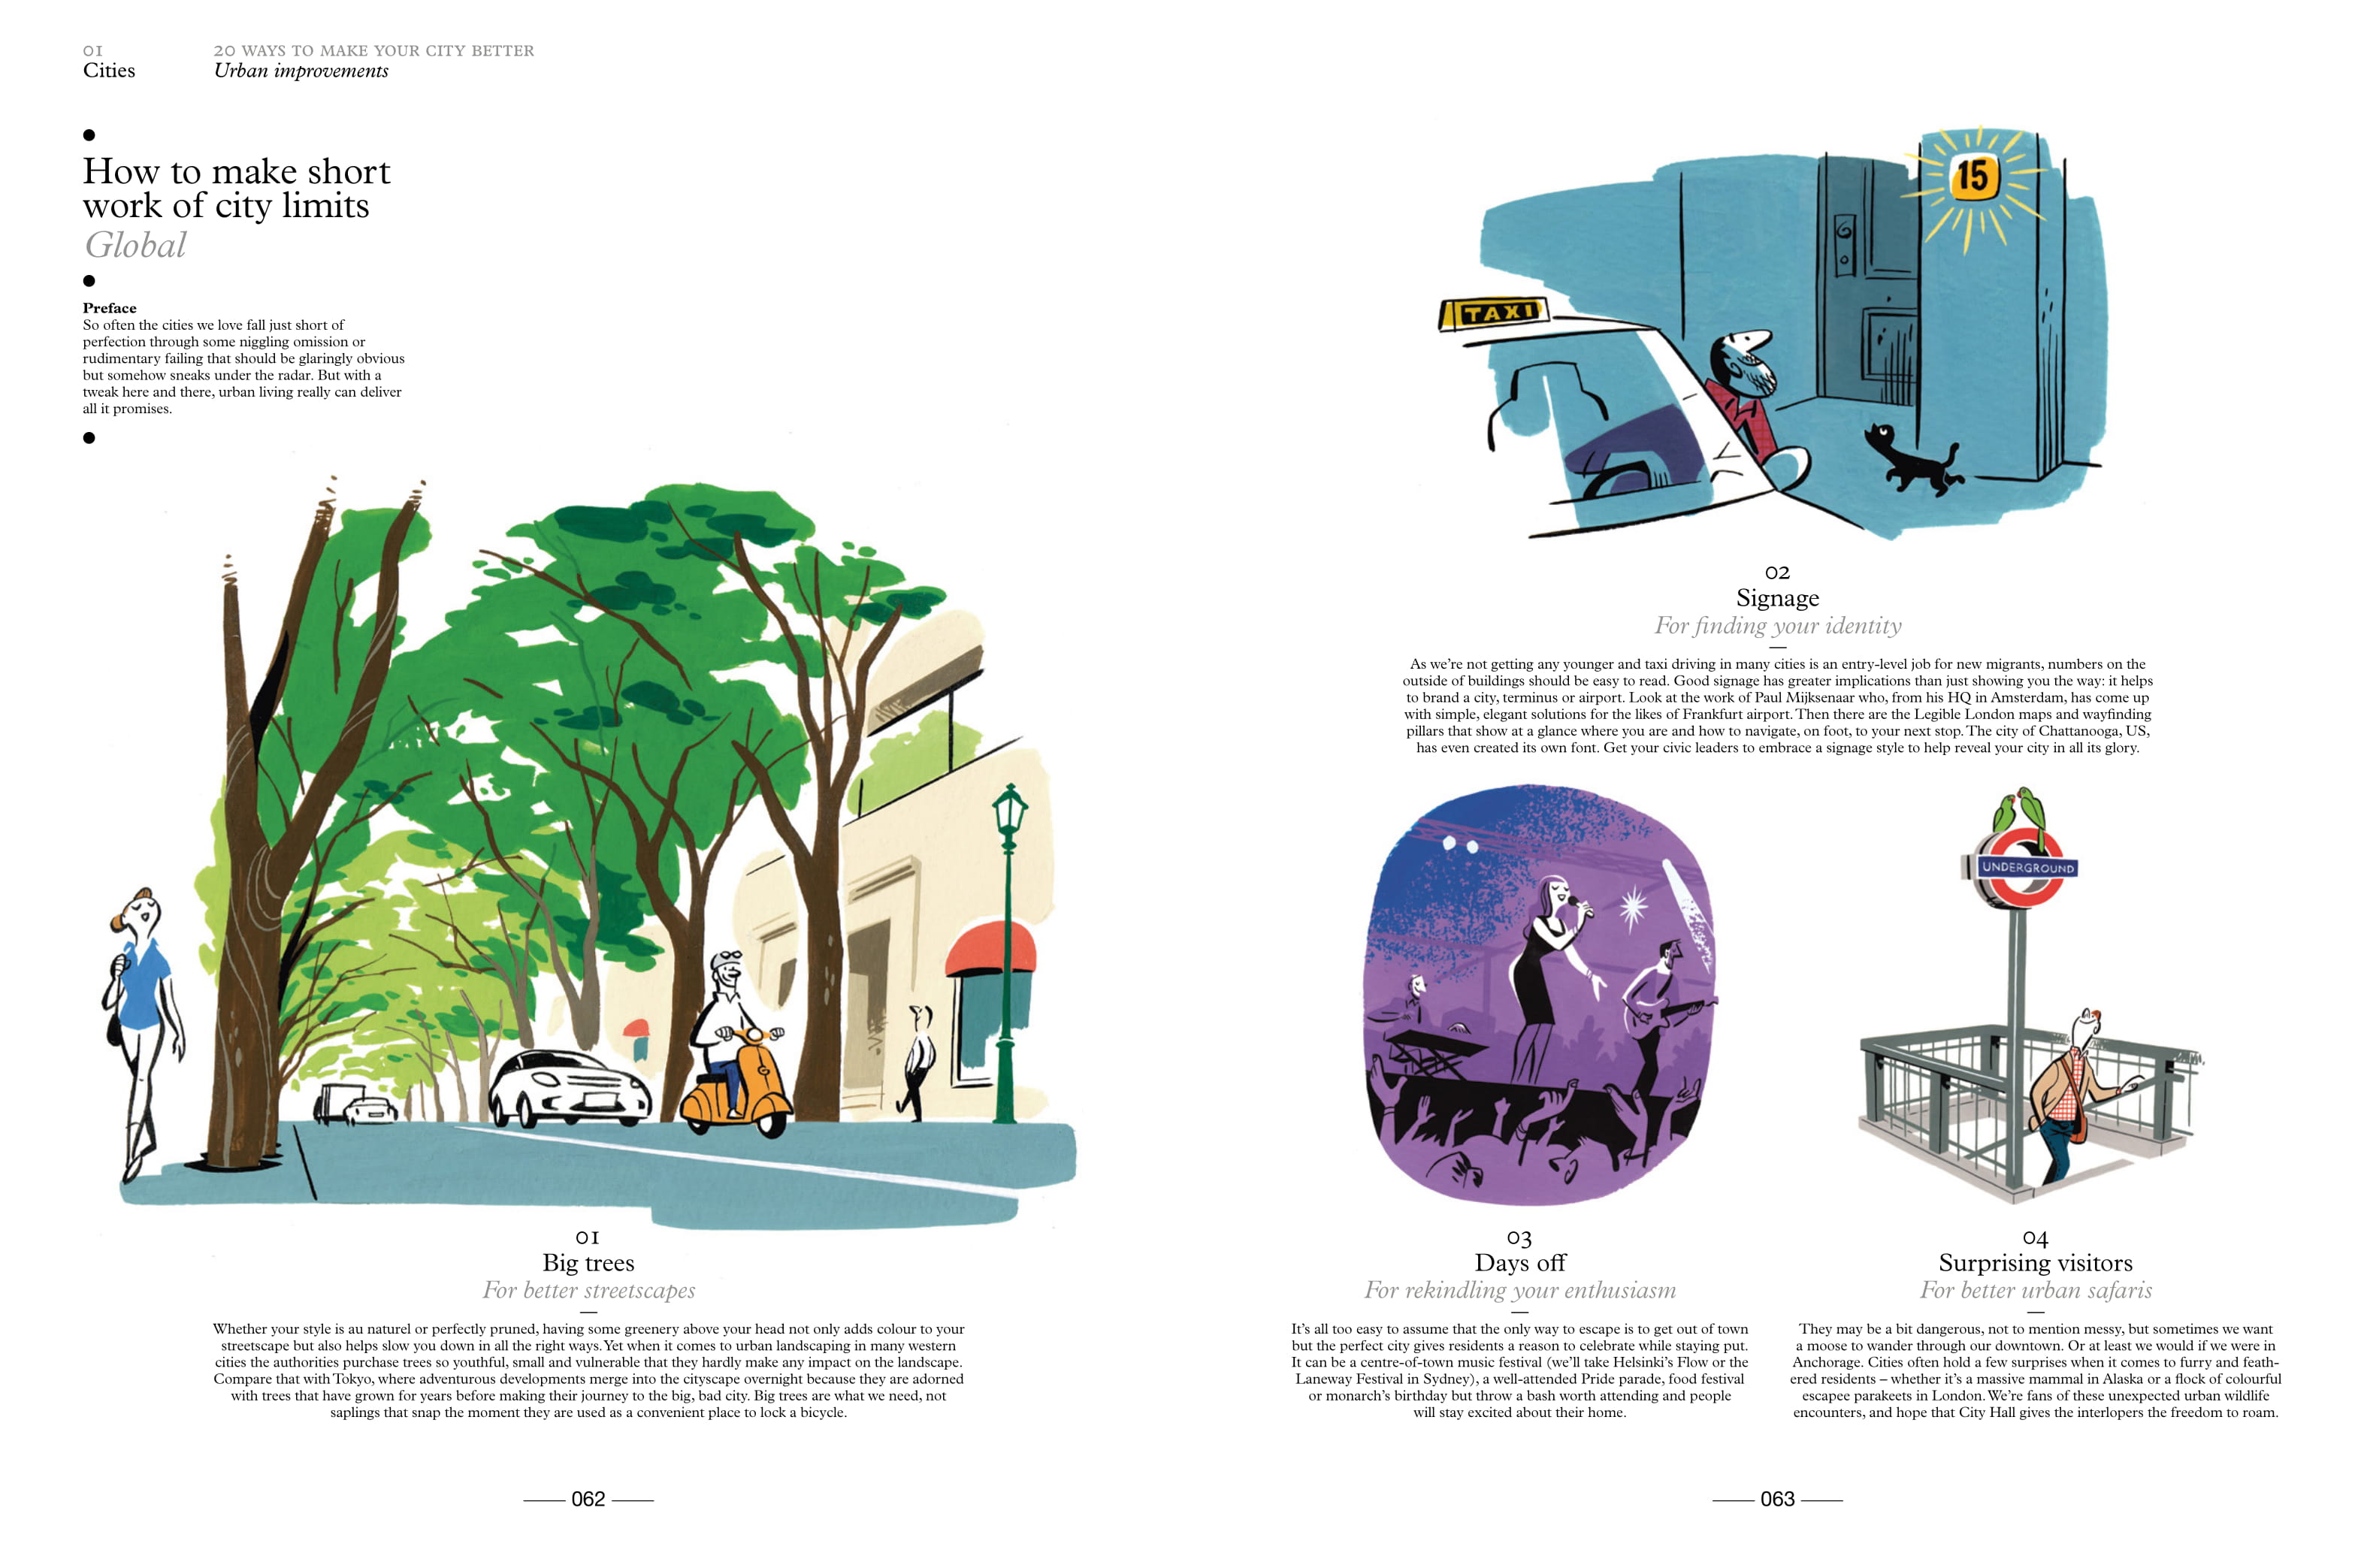 By Monocle from The Monocle Guide to Better Living copyright Gestalten 2013